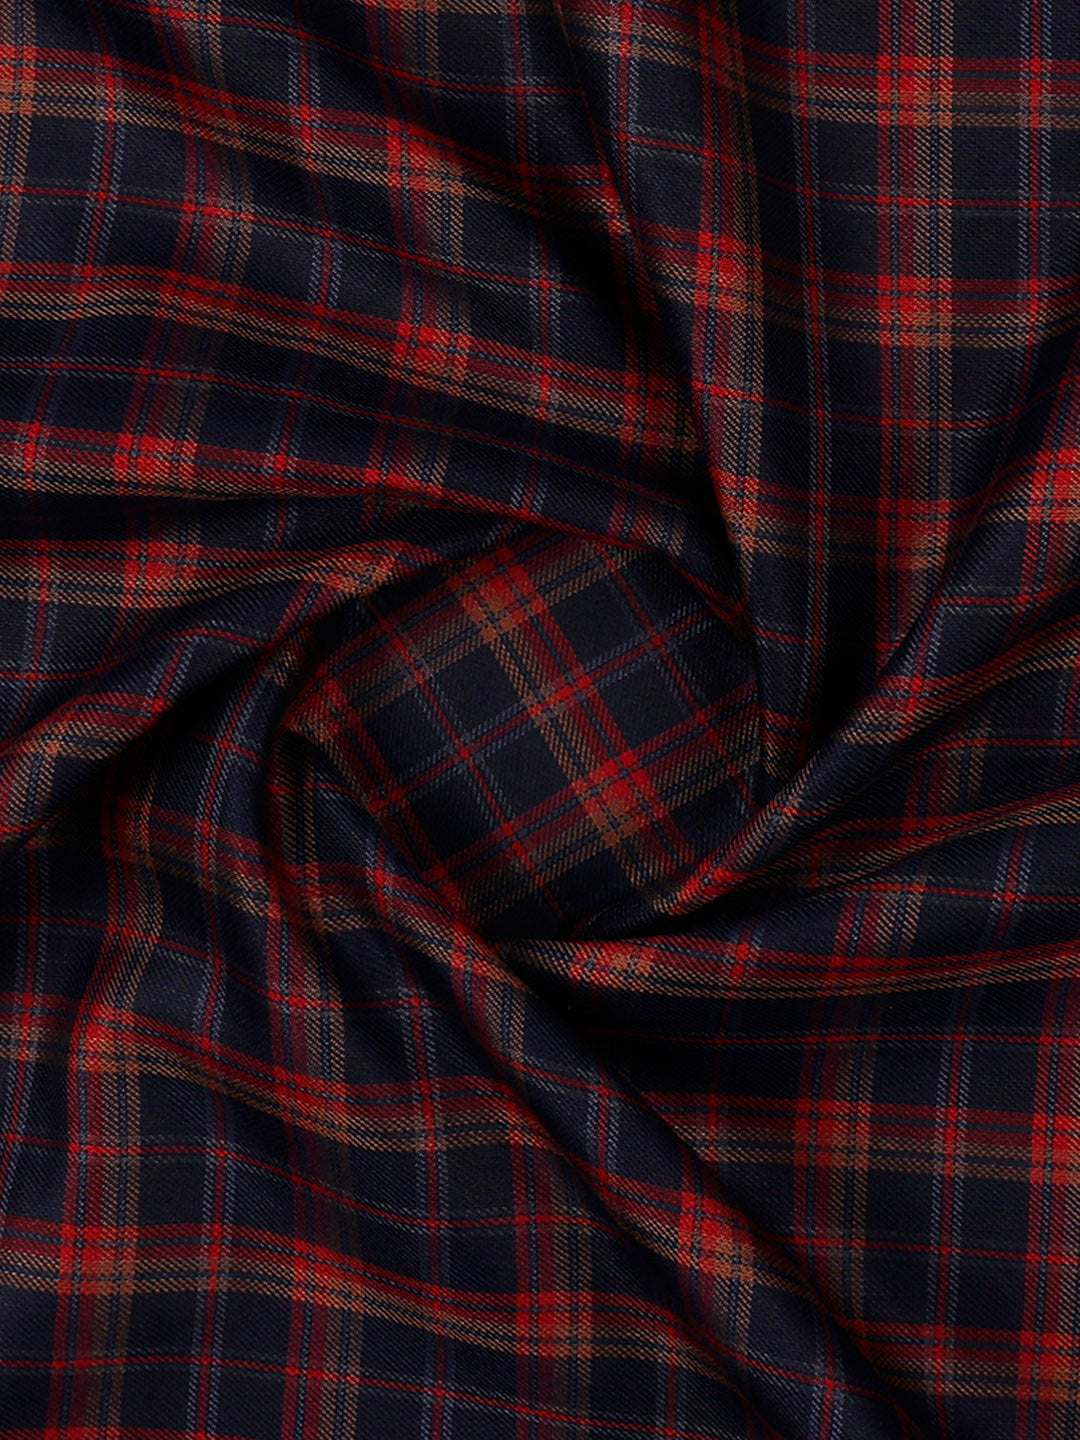 Cotton Red Check Shirt Fabric High Style